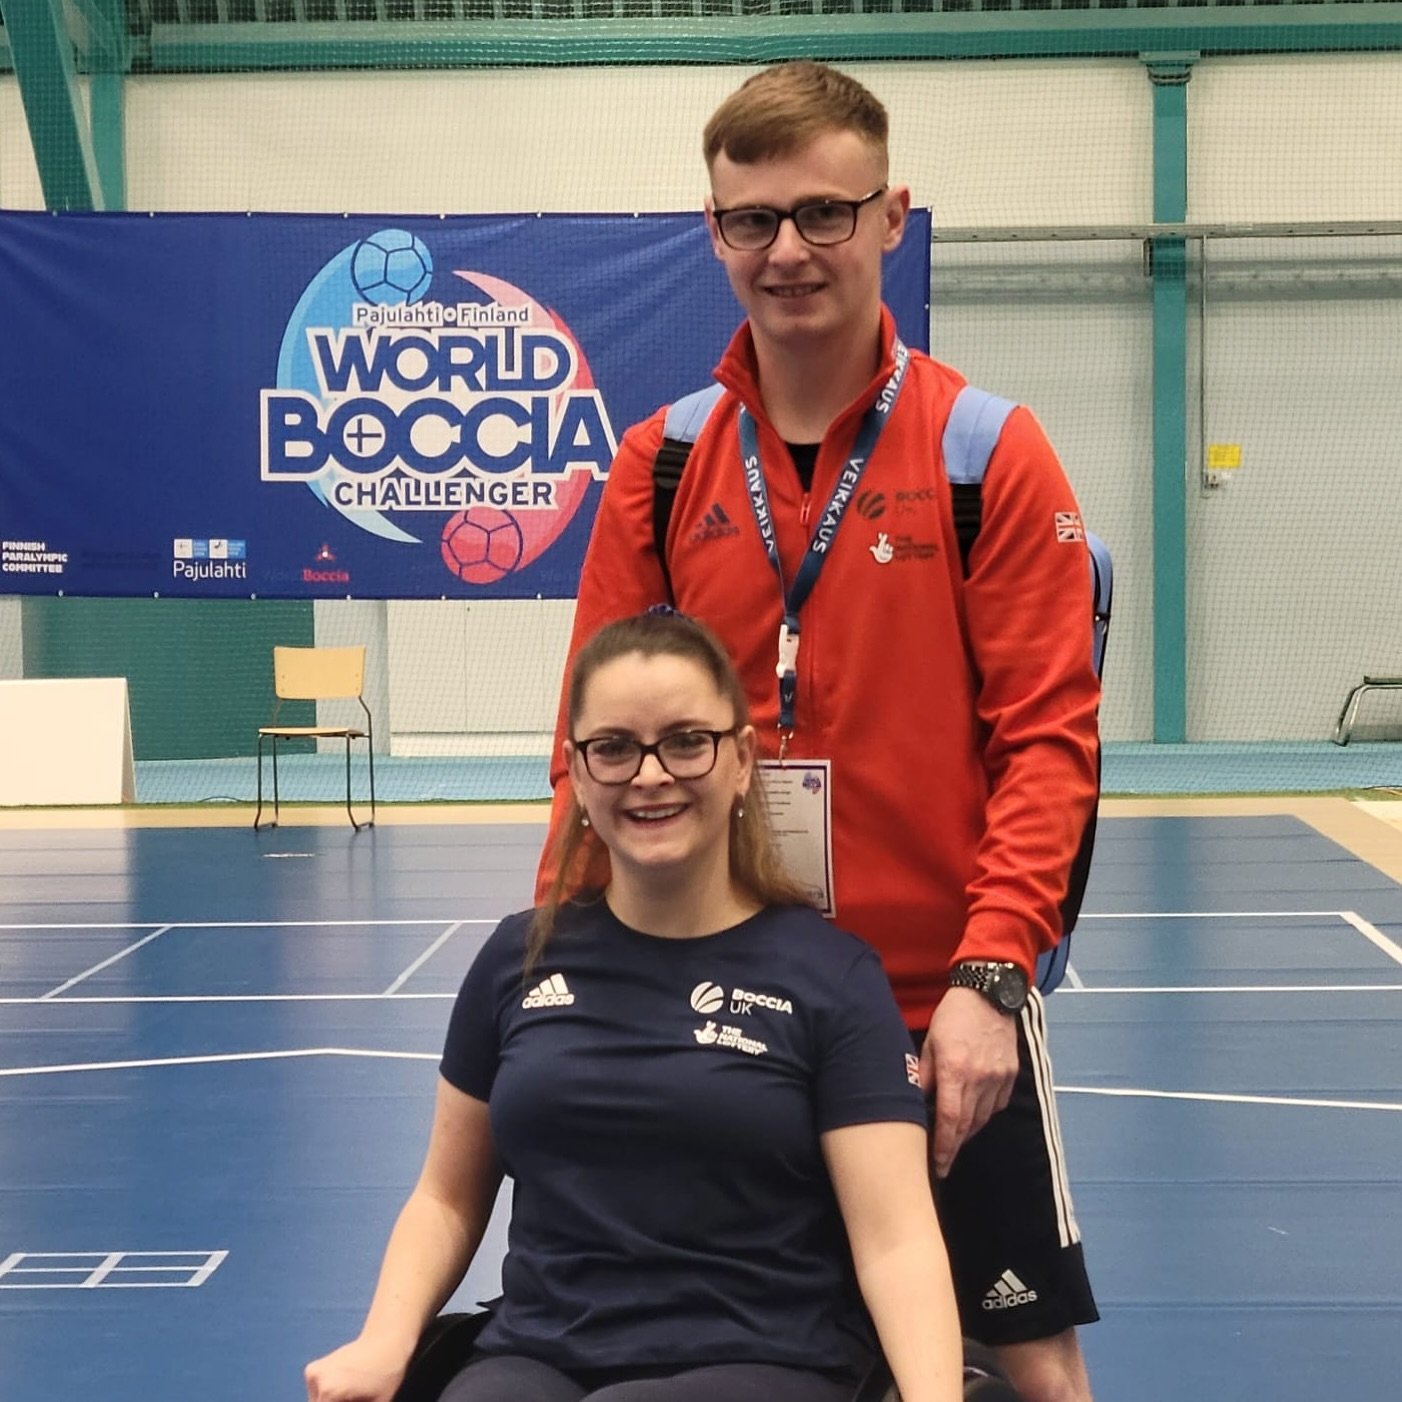 It&rsquo;s GOLD for @kayleigh_haggo on Lahti - this is her first international gold medal in the individuals. She beat Belgium&rsquo;s Tina Pinxten 12-0.

So proud of you  Kayleigh! And thanks @ctaggart830 for the 📸.

@sds_sport #boccia #paralympics